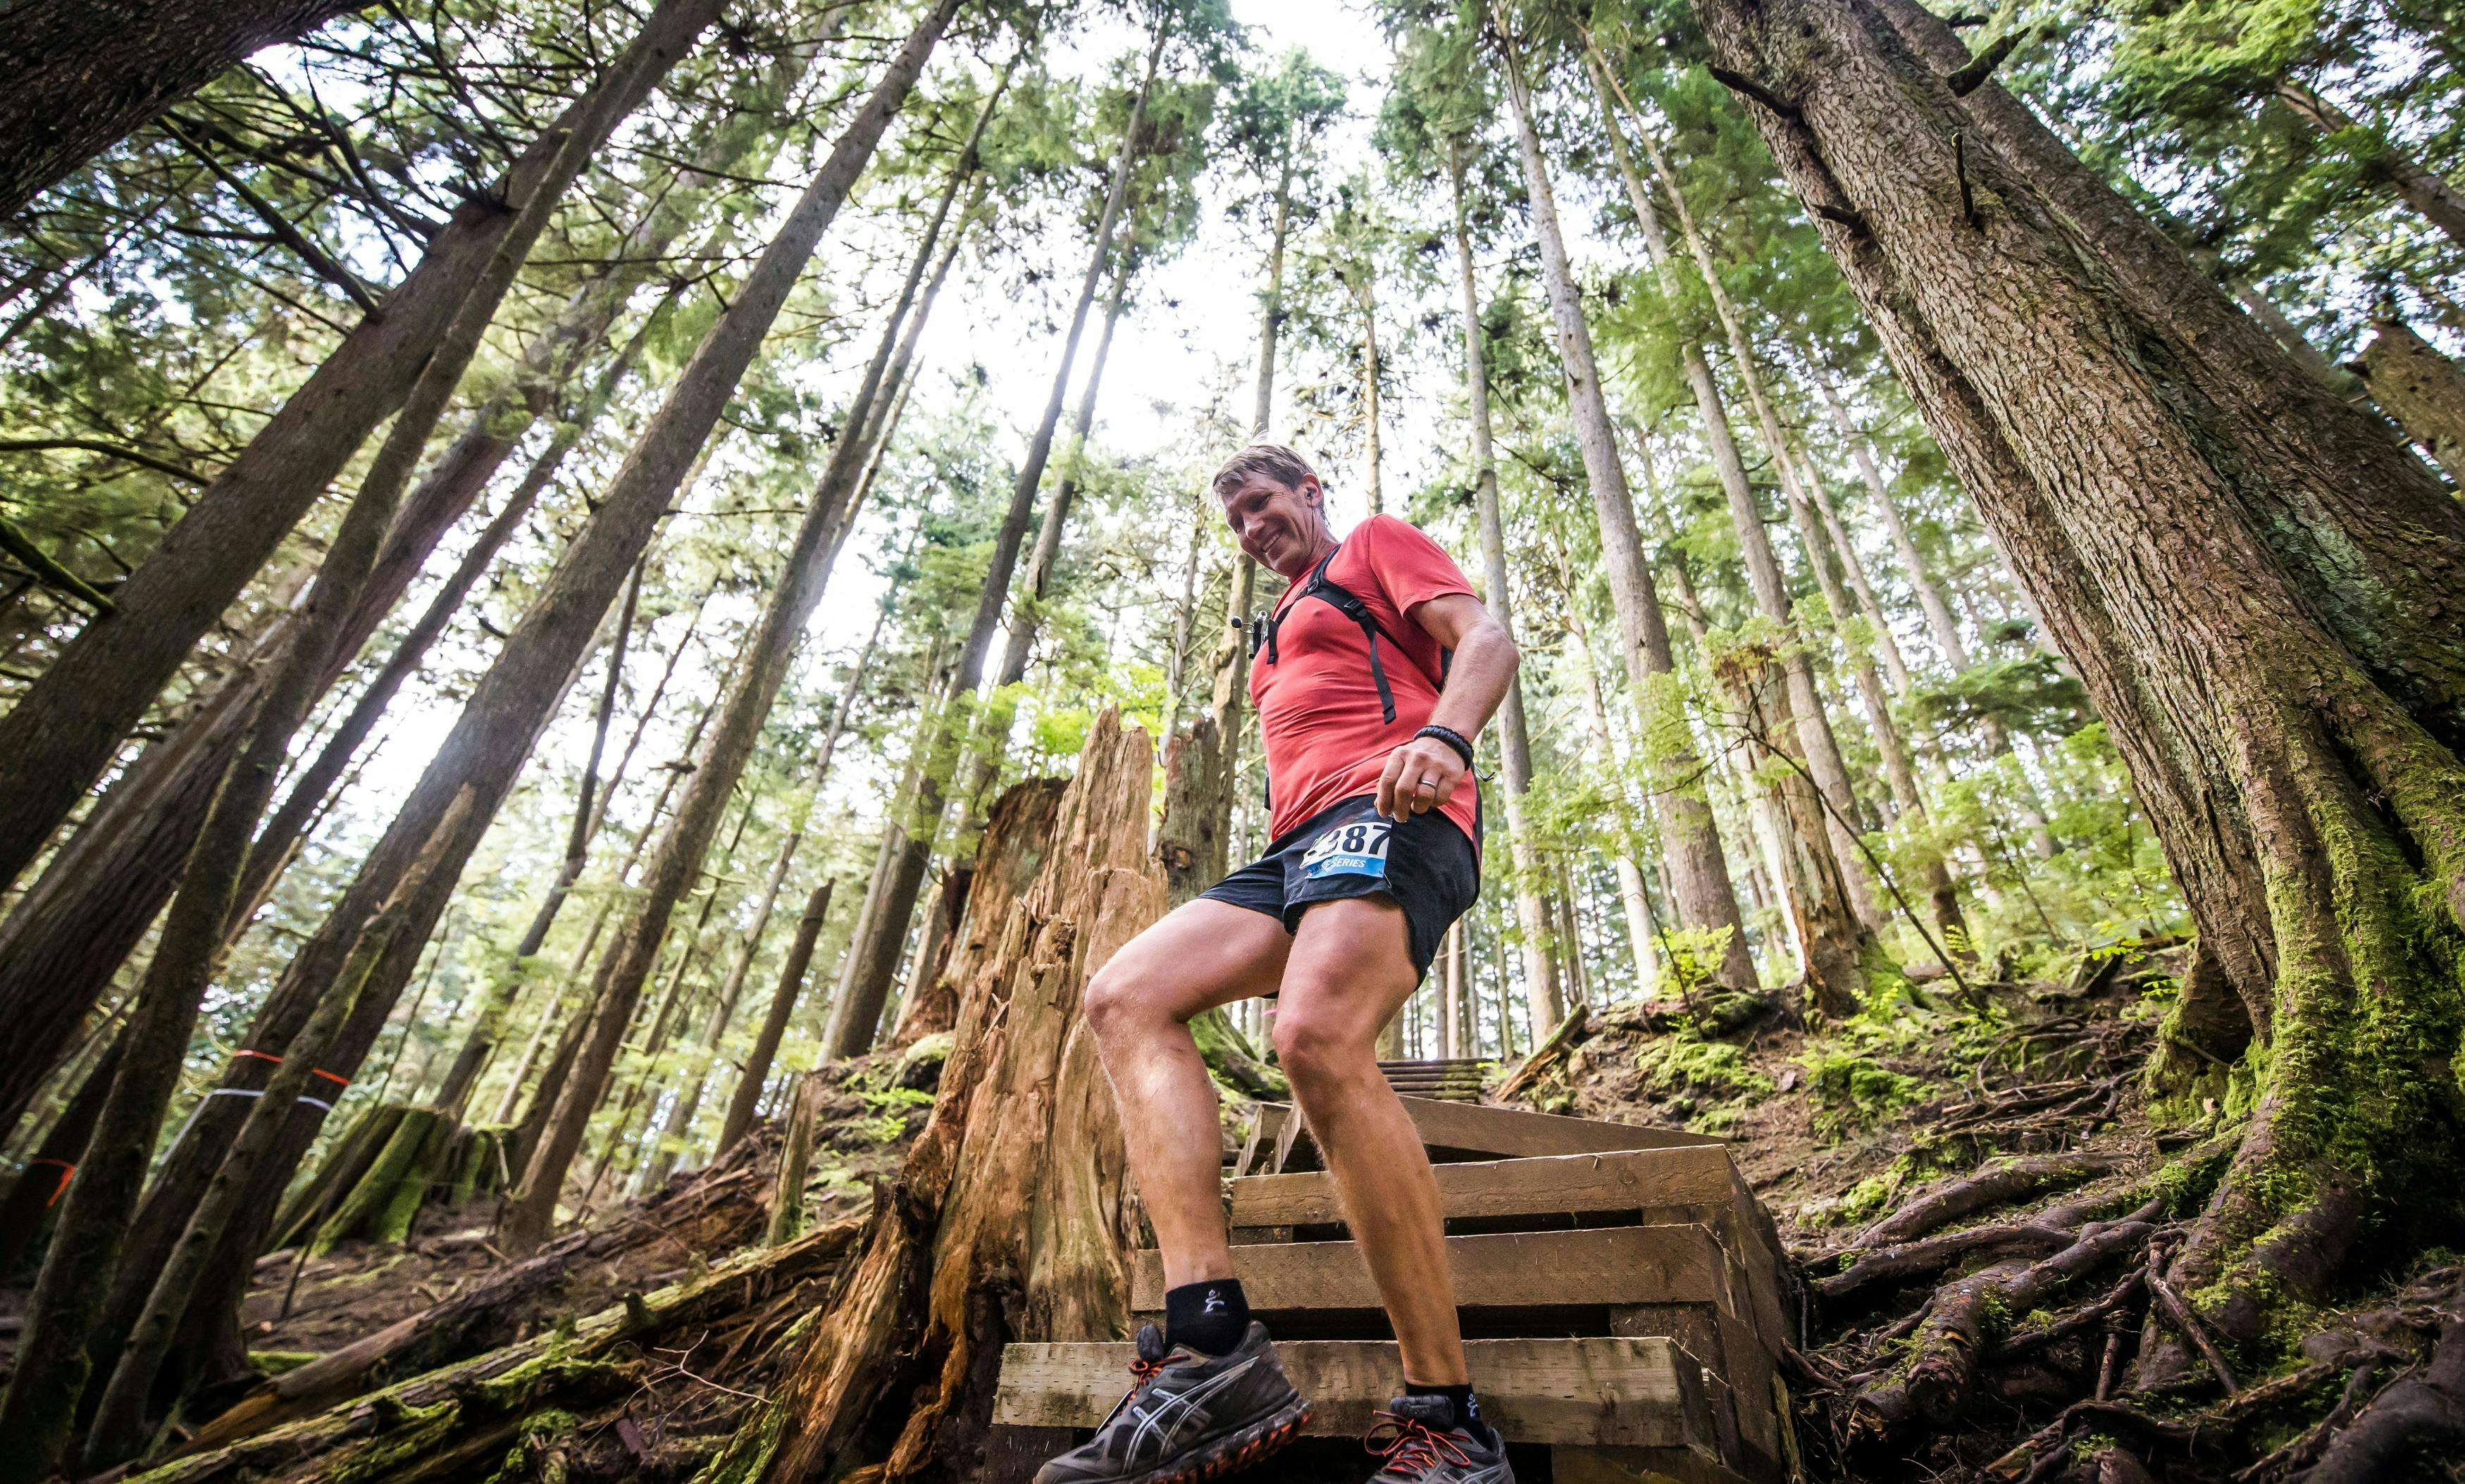 A trail runner descends a wooden staircase in the middle of a trail race.